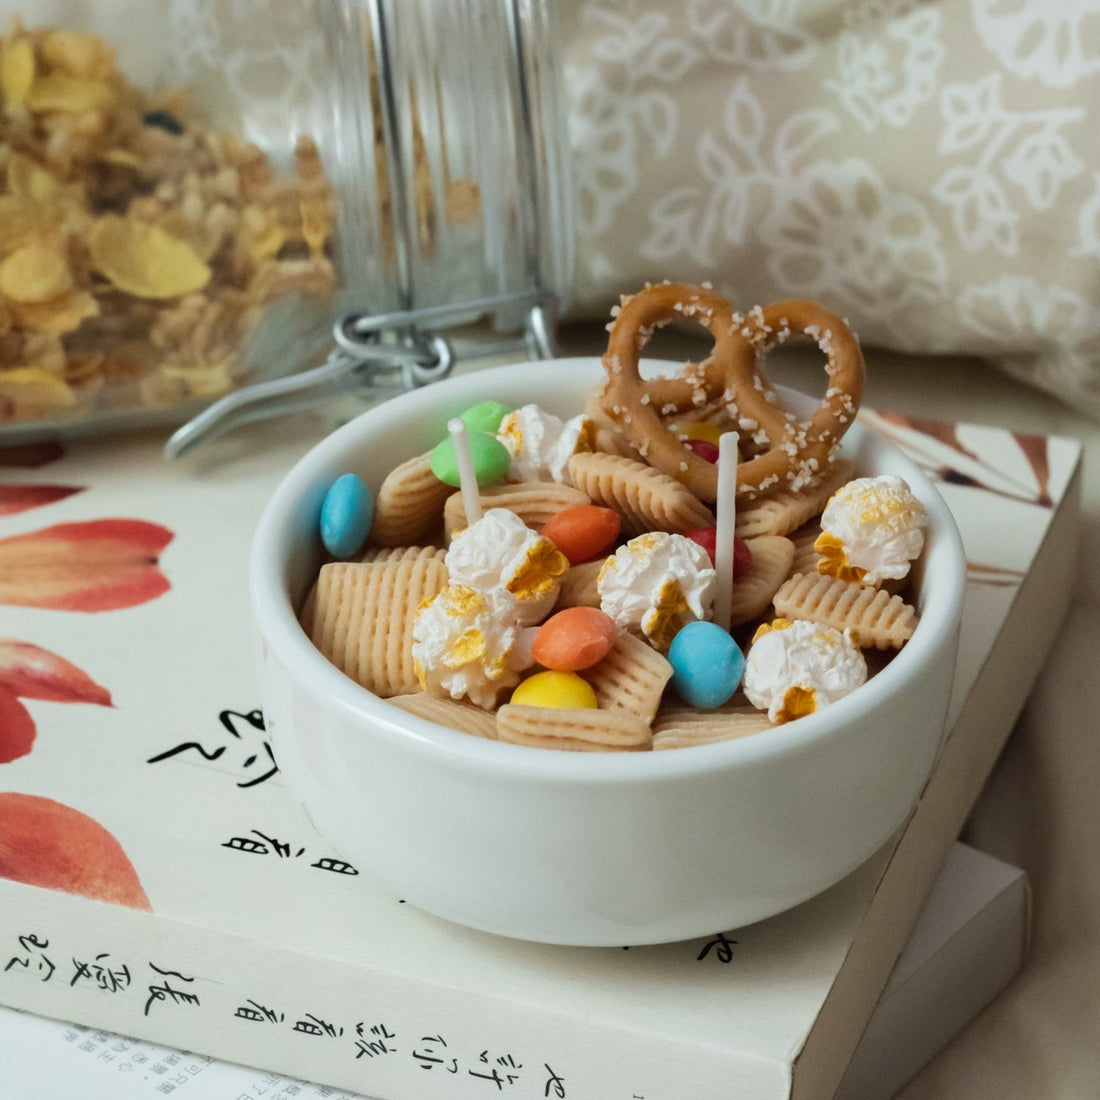 Fruit Loops Cereal Candle Bowl – Southlake gifts